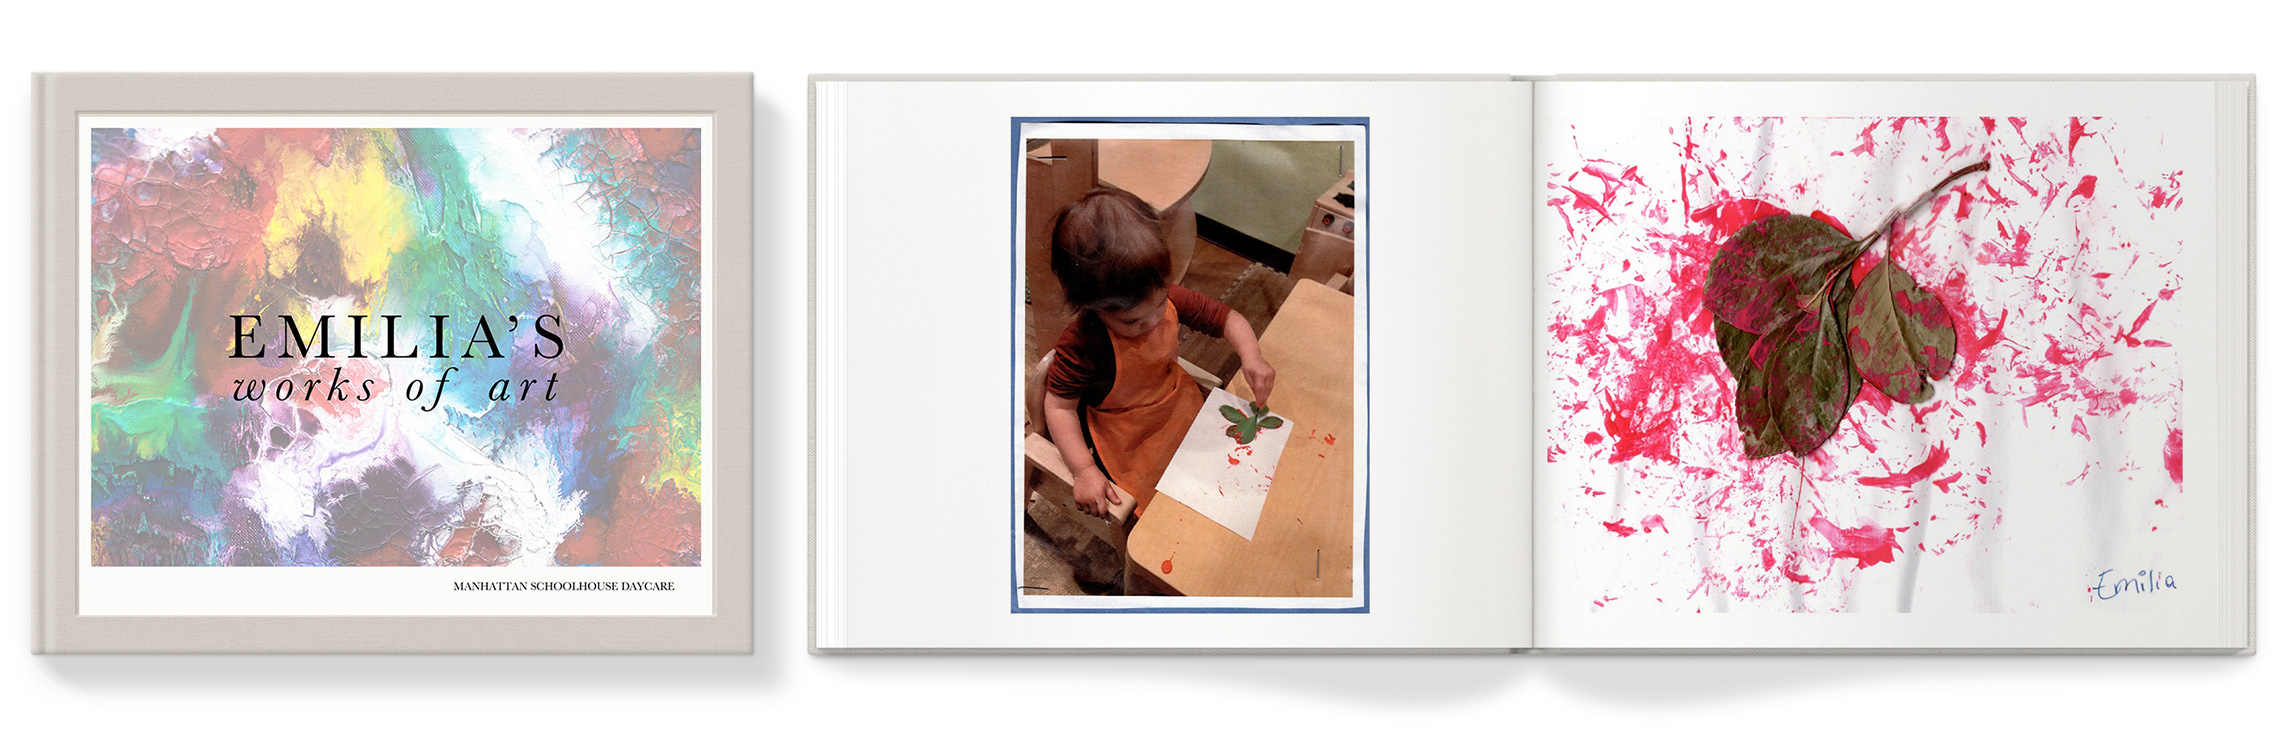 Closed photo book and open photo book with images of a child's artwork.